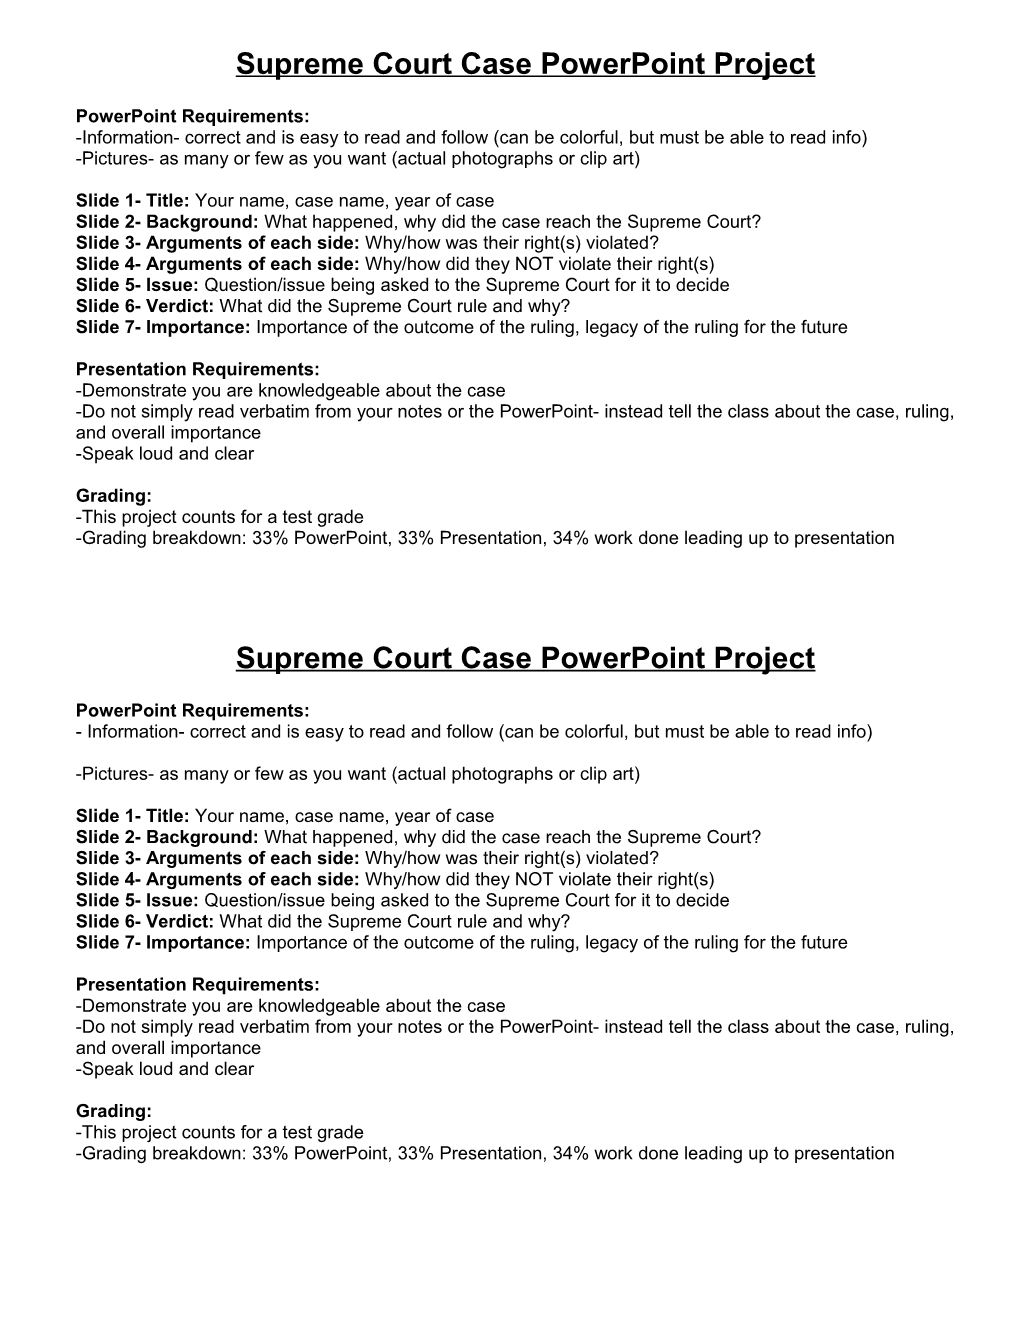 Supreme Court Case Powerpoint Project